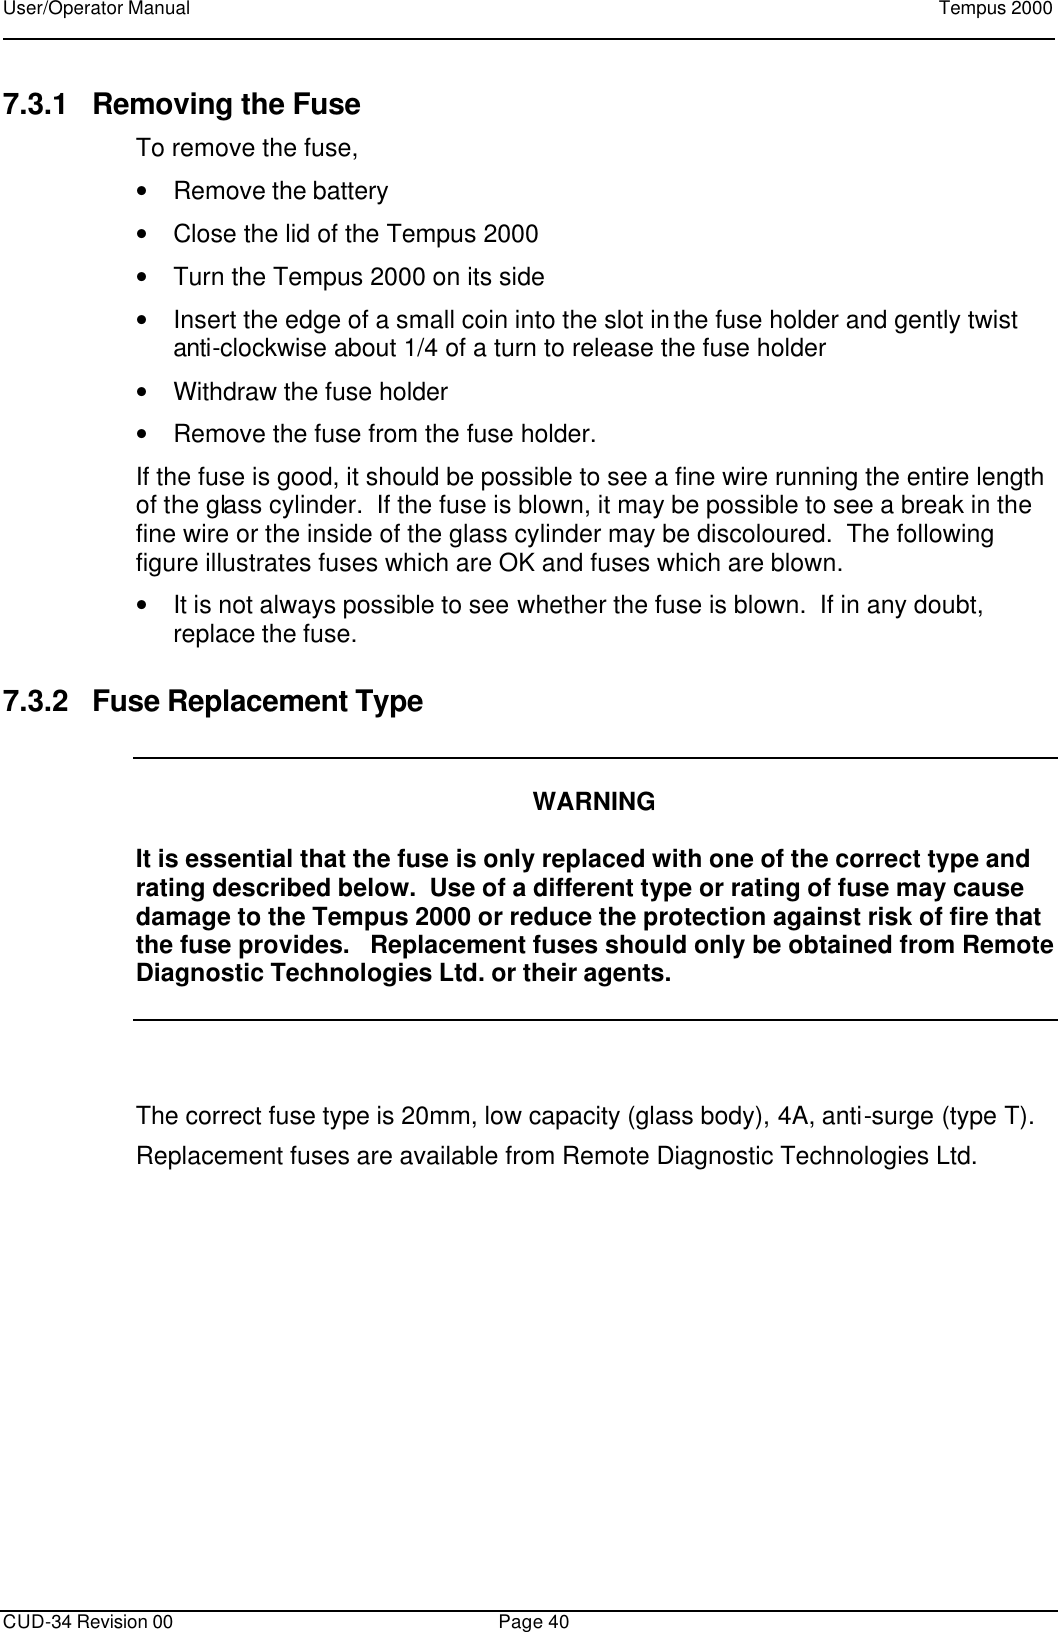 User/Operator Manual    Tempus 2000      CUD-34 Revision 00 Page 40  7.3.1 Removing the Fuse To remove the fuse,  • Remove the battery  • Close the lid of the Tempus 2000 • Turn the Tempus 2000 on its side • Insert the edge of a small coin into the slot in the fuse holder and gently twist anti-clockwise about 1/4 of a turn to release the fuse holder • Withdraw the fuse holder • Remove the fuse from the fuse holder. If the fuse is good, it should be possible to see a fine wire running the entire length of the glass cylinder.  If the fuse is blown, it may be possible to see a break in the fine wire or the inside of the glass cylinder may be discoloured.  The following figure illustrates fuses which are OK and fuses which are blown. • It is not always possible to see whether the fuse is blown.  If in any doubt, replace the fuse. 7.3.2 Fuse Replacement Type     WARNING  It is essential that the fuse is only replaced with one of the correct type and rating described below.  Use of a different type or rating of fuse may cause damage to the Tempus 2000 or reduce the protection against risk of fire that the fuse provides.   Replacement fuses should only be obtained from Remote Diagnostic Technologies Ltd. or their agents.   The correct fuse type is 20mm, low capacity (glass body), 4A, anti-surge (type T).   Replacement fuses are available from Remote Diagnostic Technologies Ltd. 